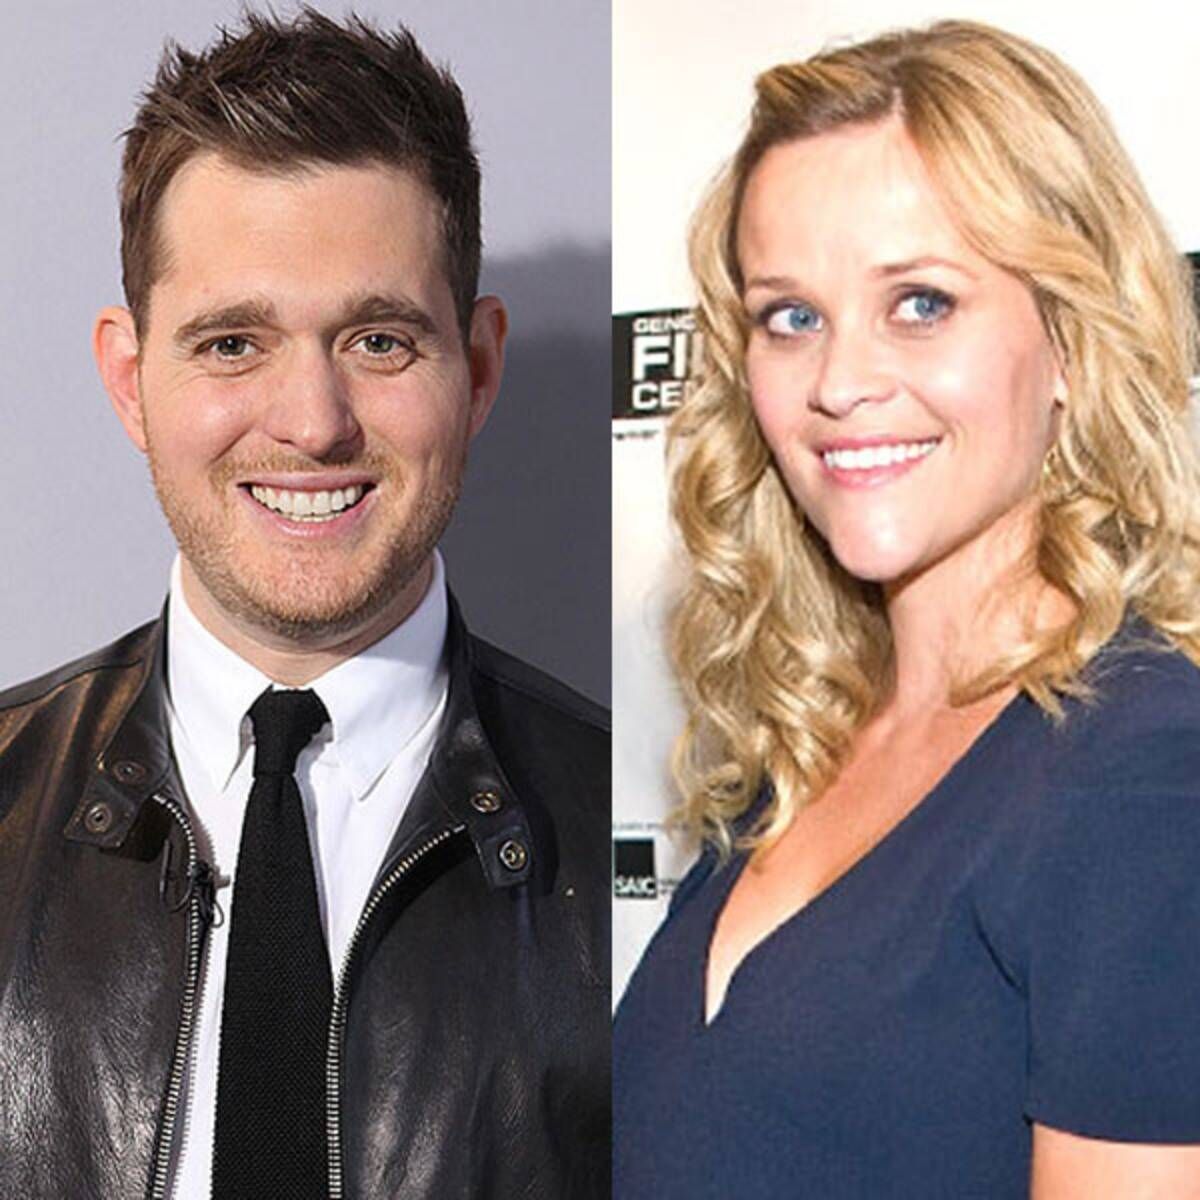 Michael Buble and Reese Witherspoon Duet